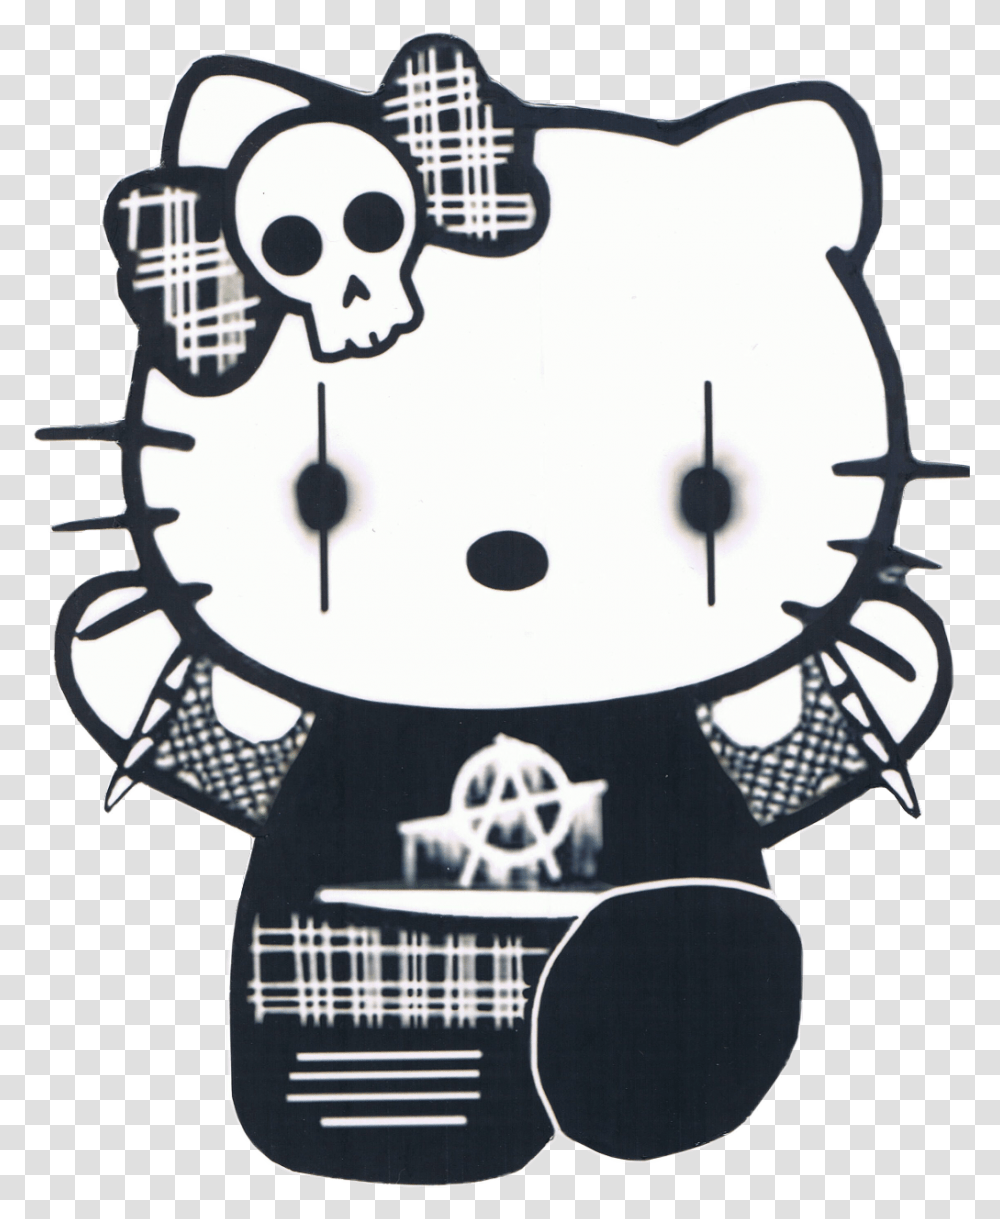 Hello Kitty Clipart Black And White Goth Hello Kitty Analog Clock Wall Clock Stencil Leisure Activities Transparent Png Pngset Com